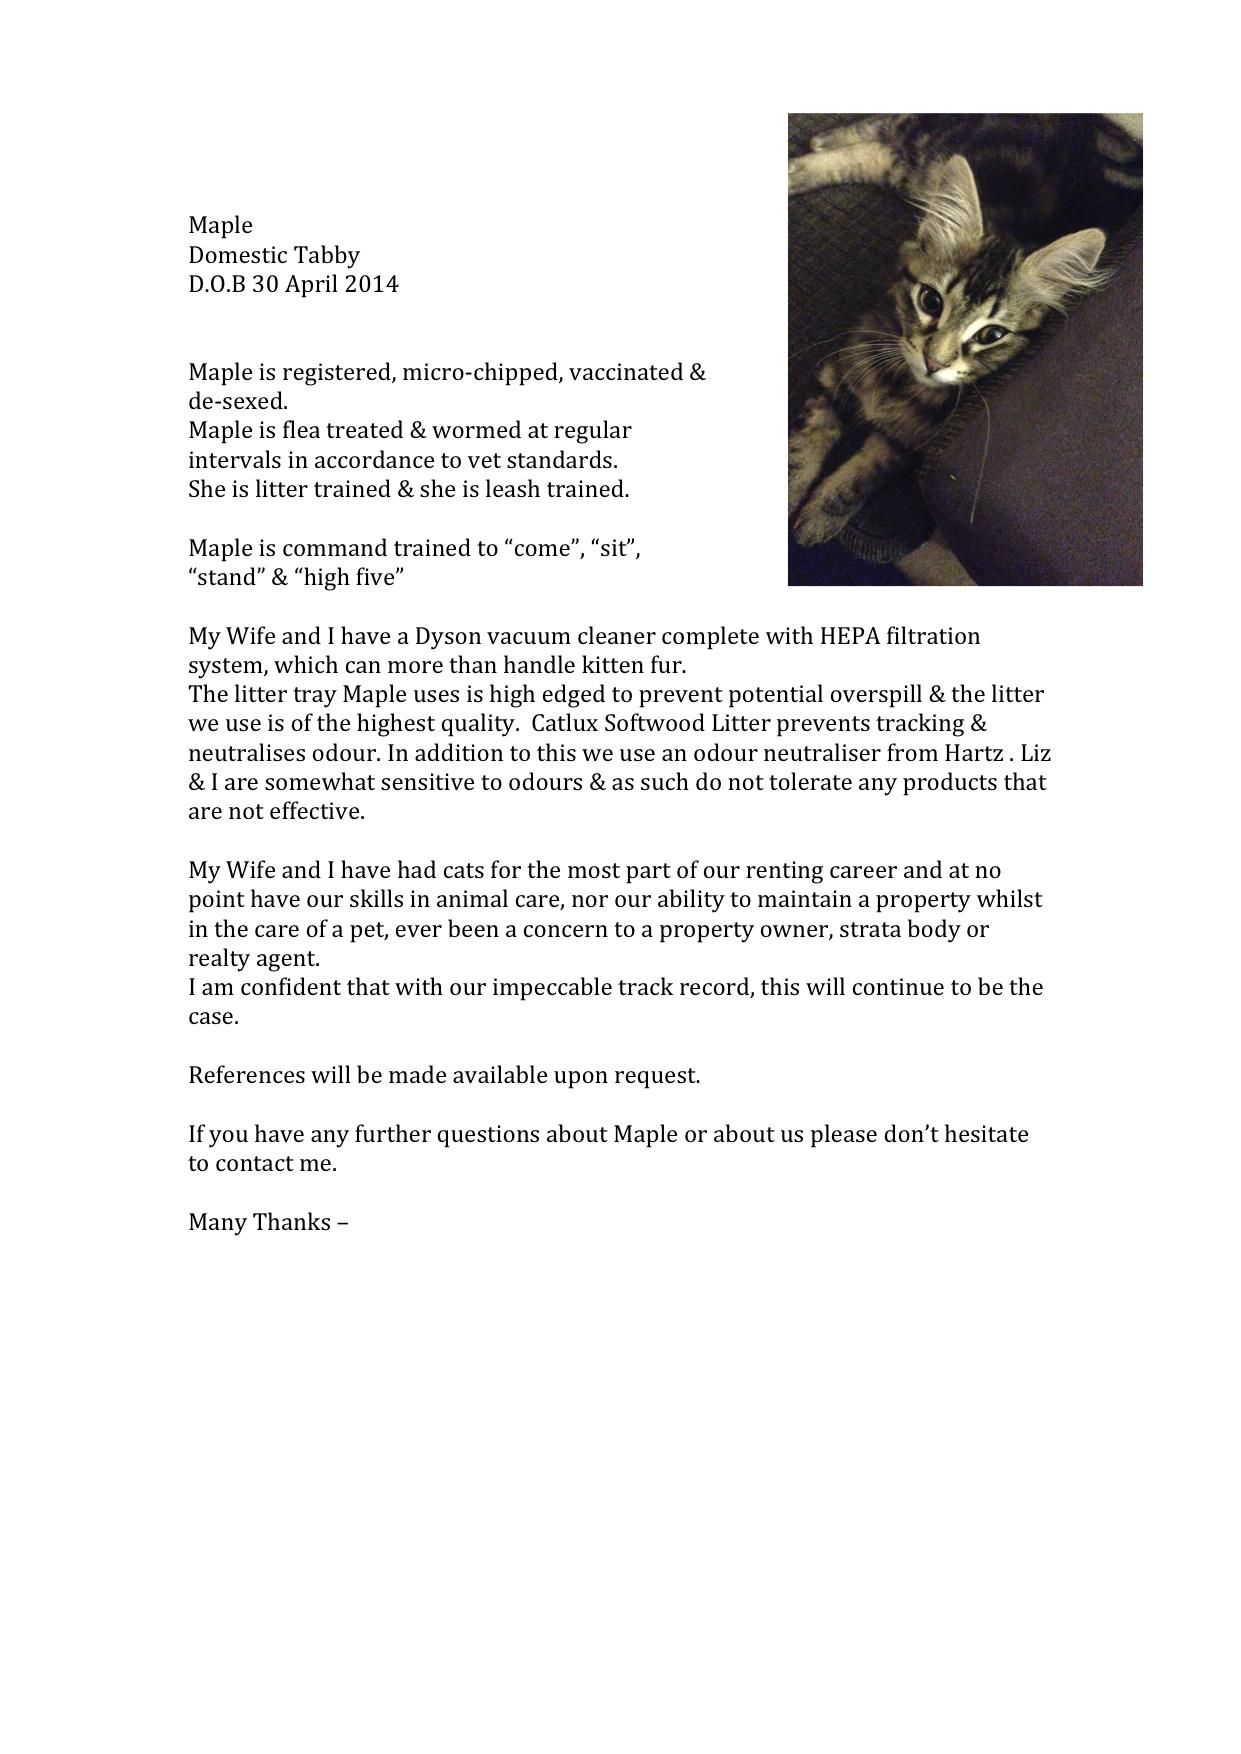 Back in 2014 my husband and I were required to make a resume for our kitten to rent an apartment. We found it tonight and haven't stopped laughing.